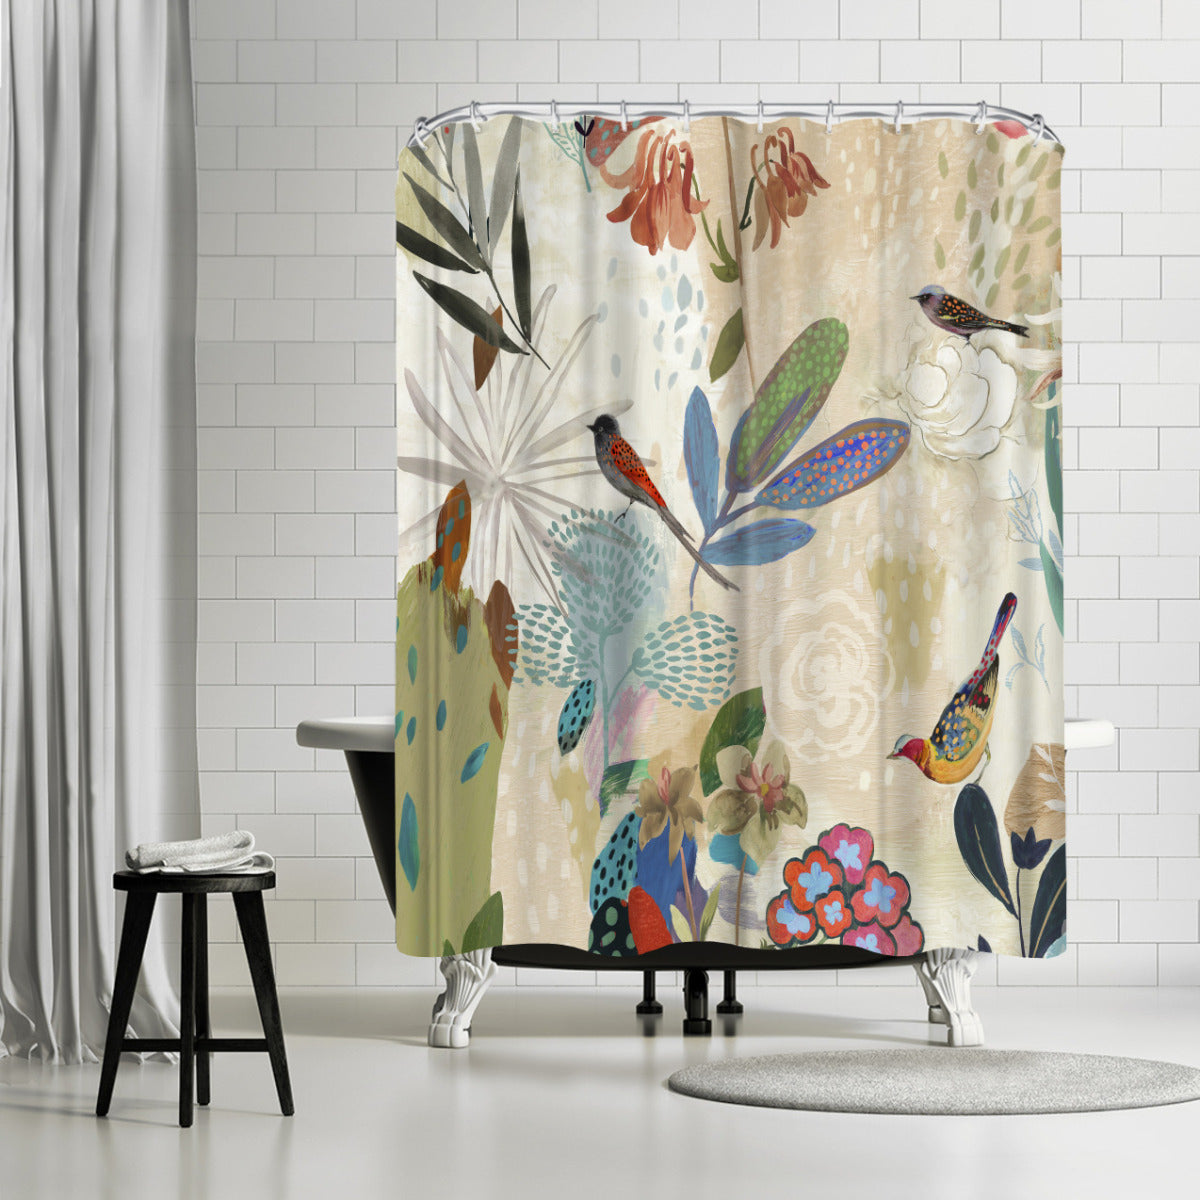 Where The Passion Flower Grows I by PI Creative Art - Shower Curtain